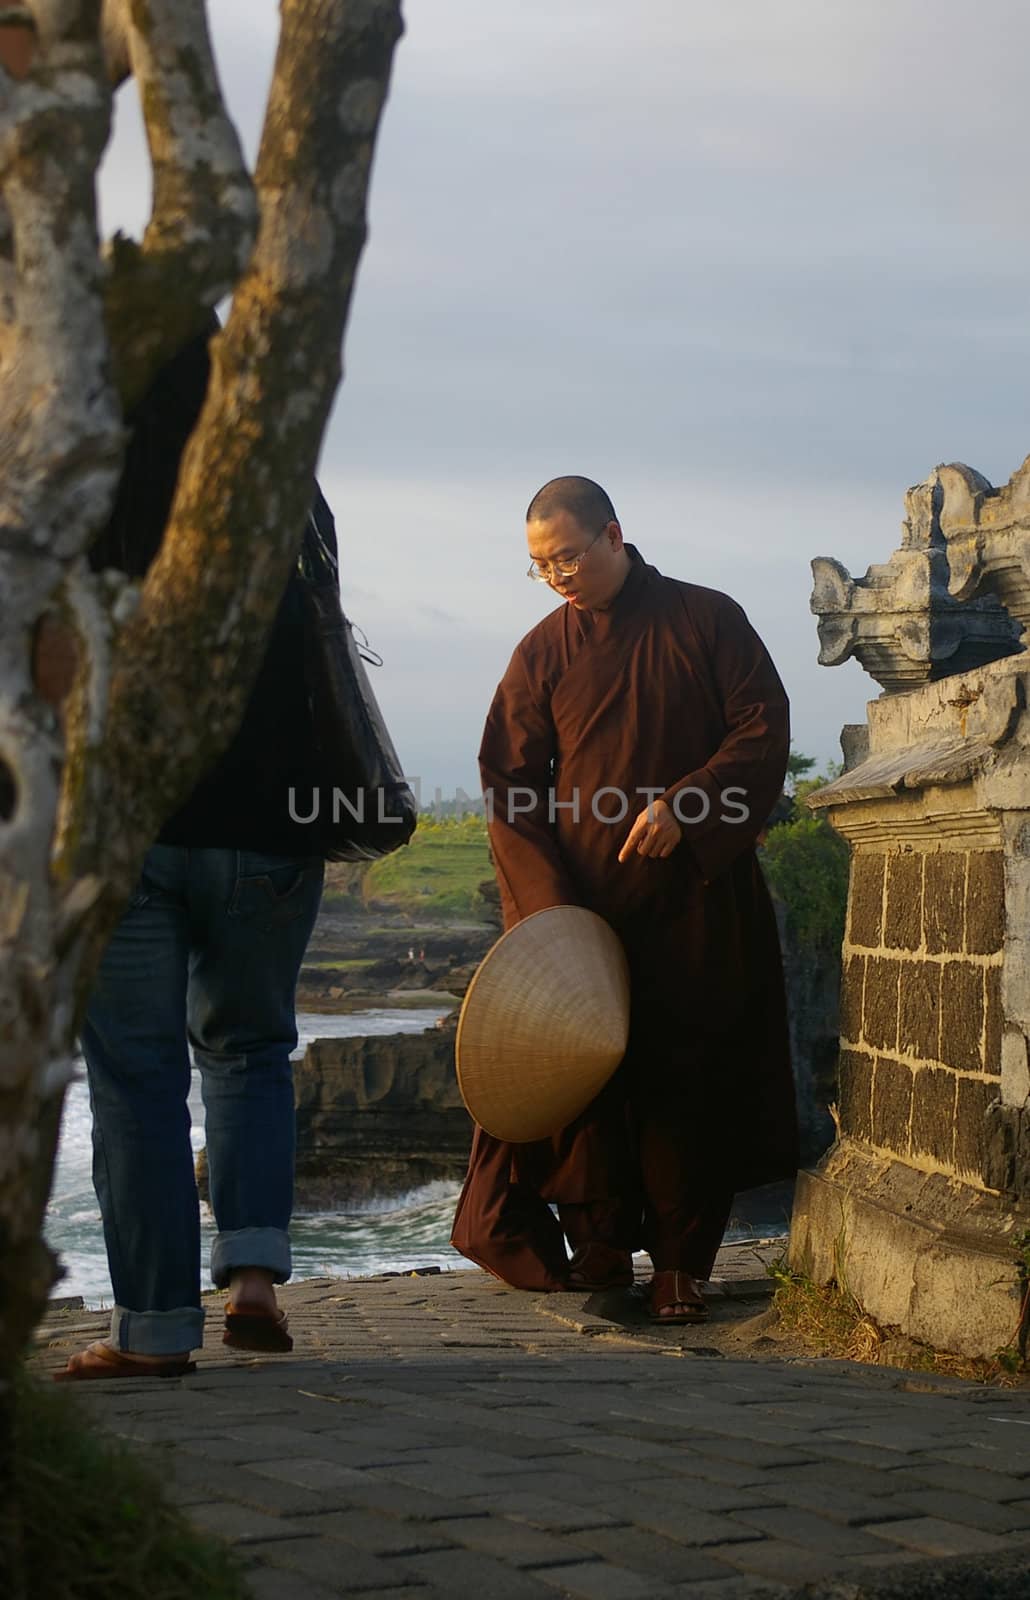 A Vietnamese Buddhist monk visiting temples in Tanah Lot, Bali, Indonesia.